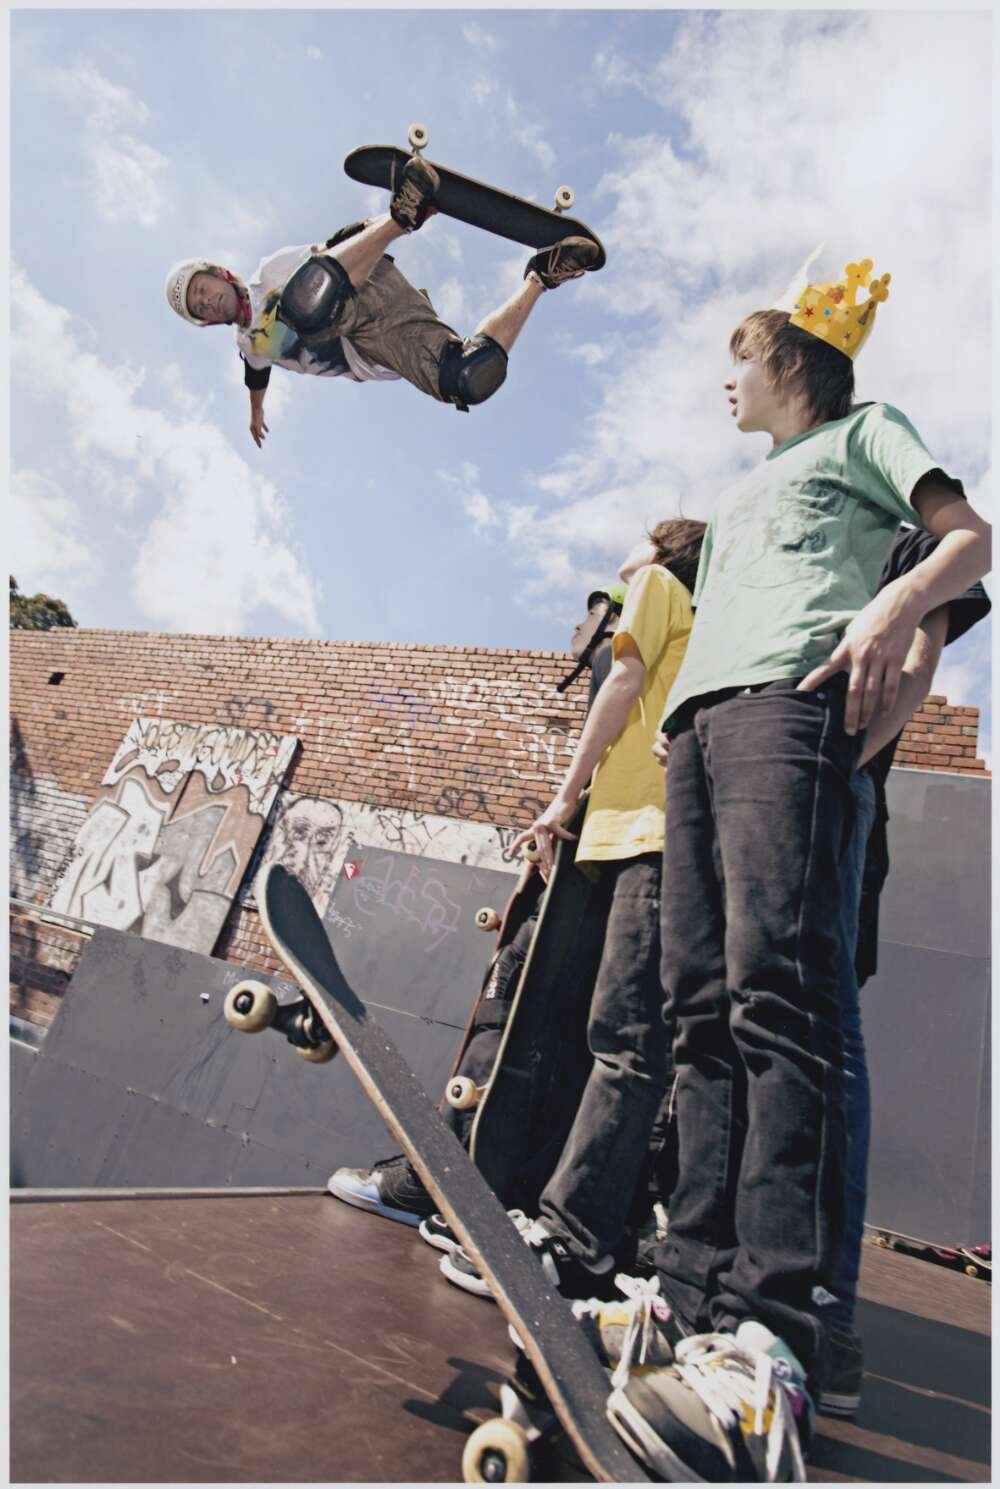 Several young skateboarders - one wearing a cardboard crown - look up at Renton Millar performing an aerial skateboard trick.